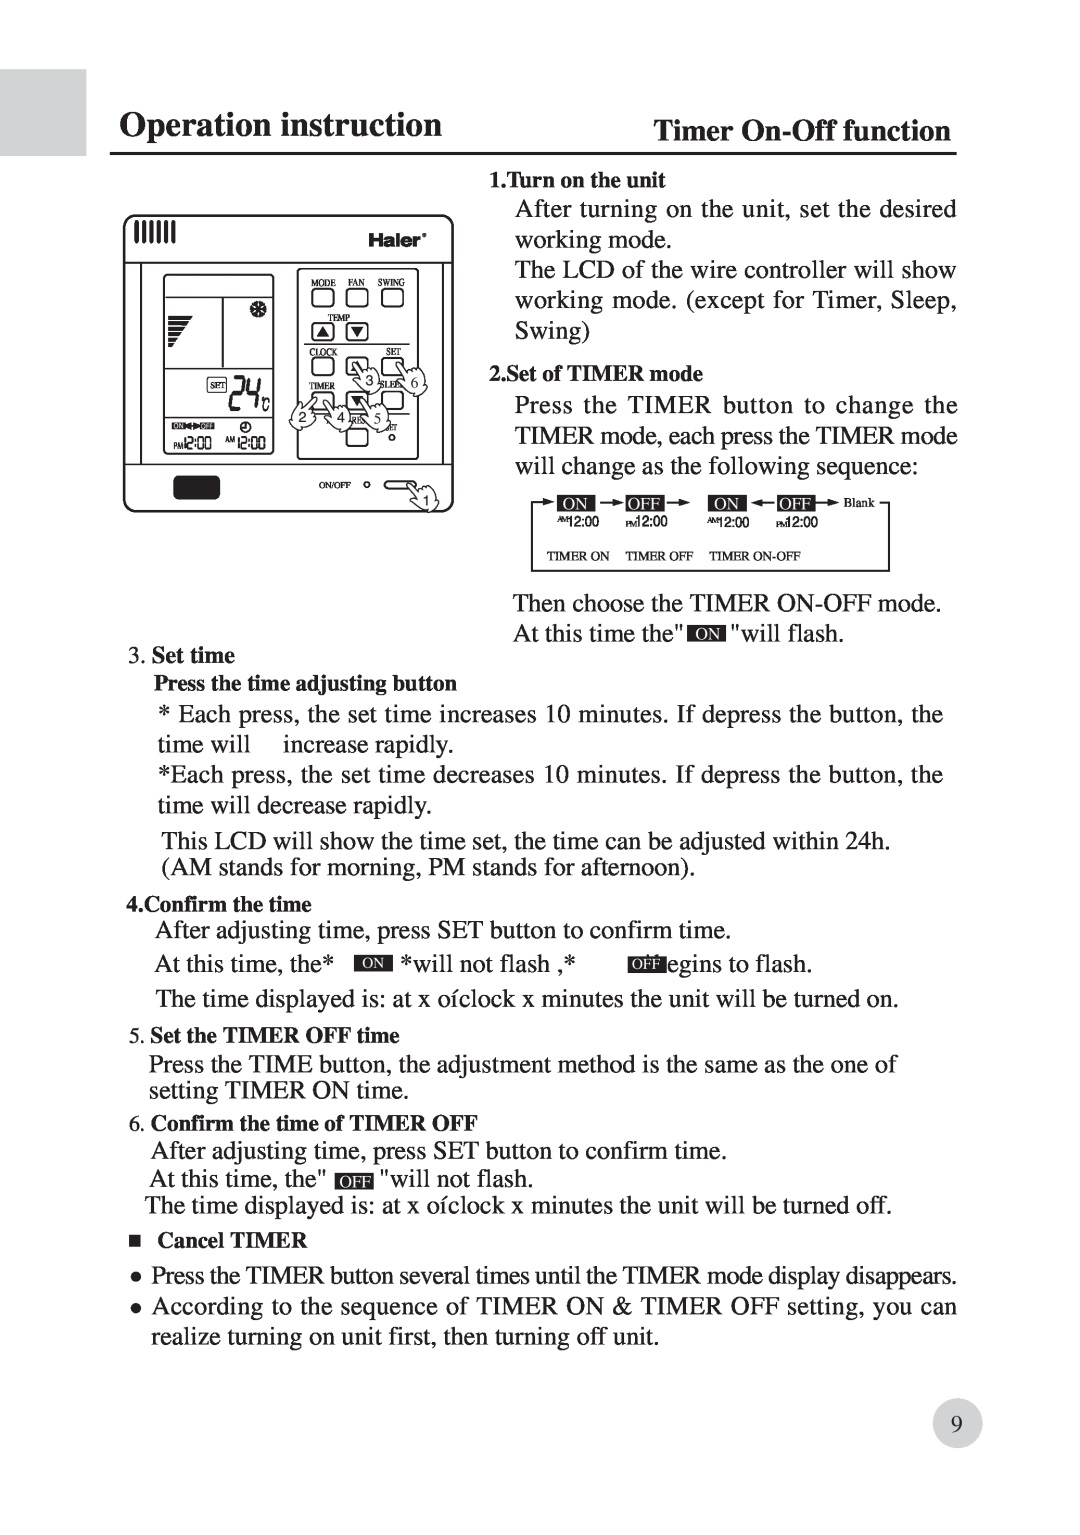 Haier AD422BMBAA manual Timer On-Offfunction, Operation instruction 